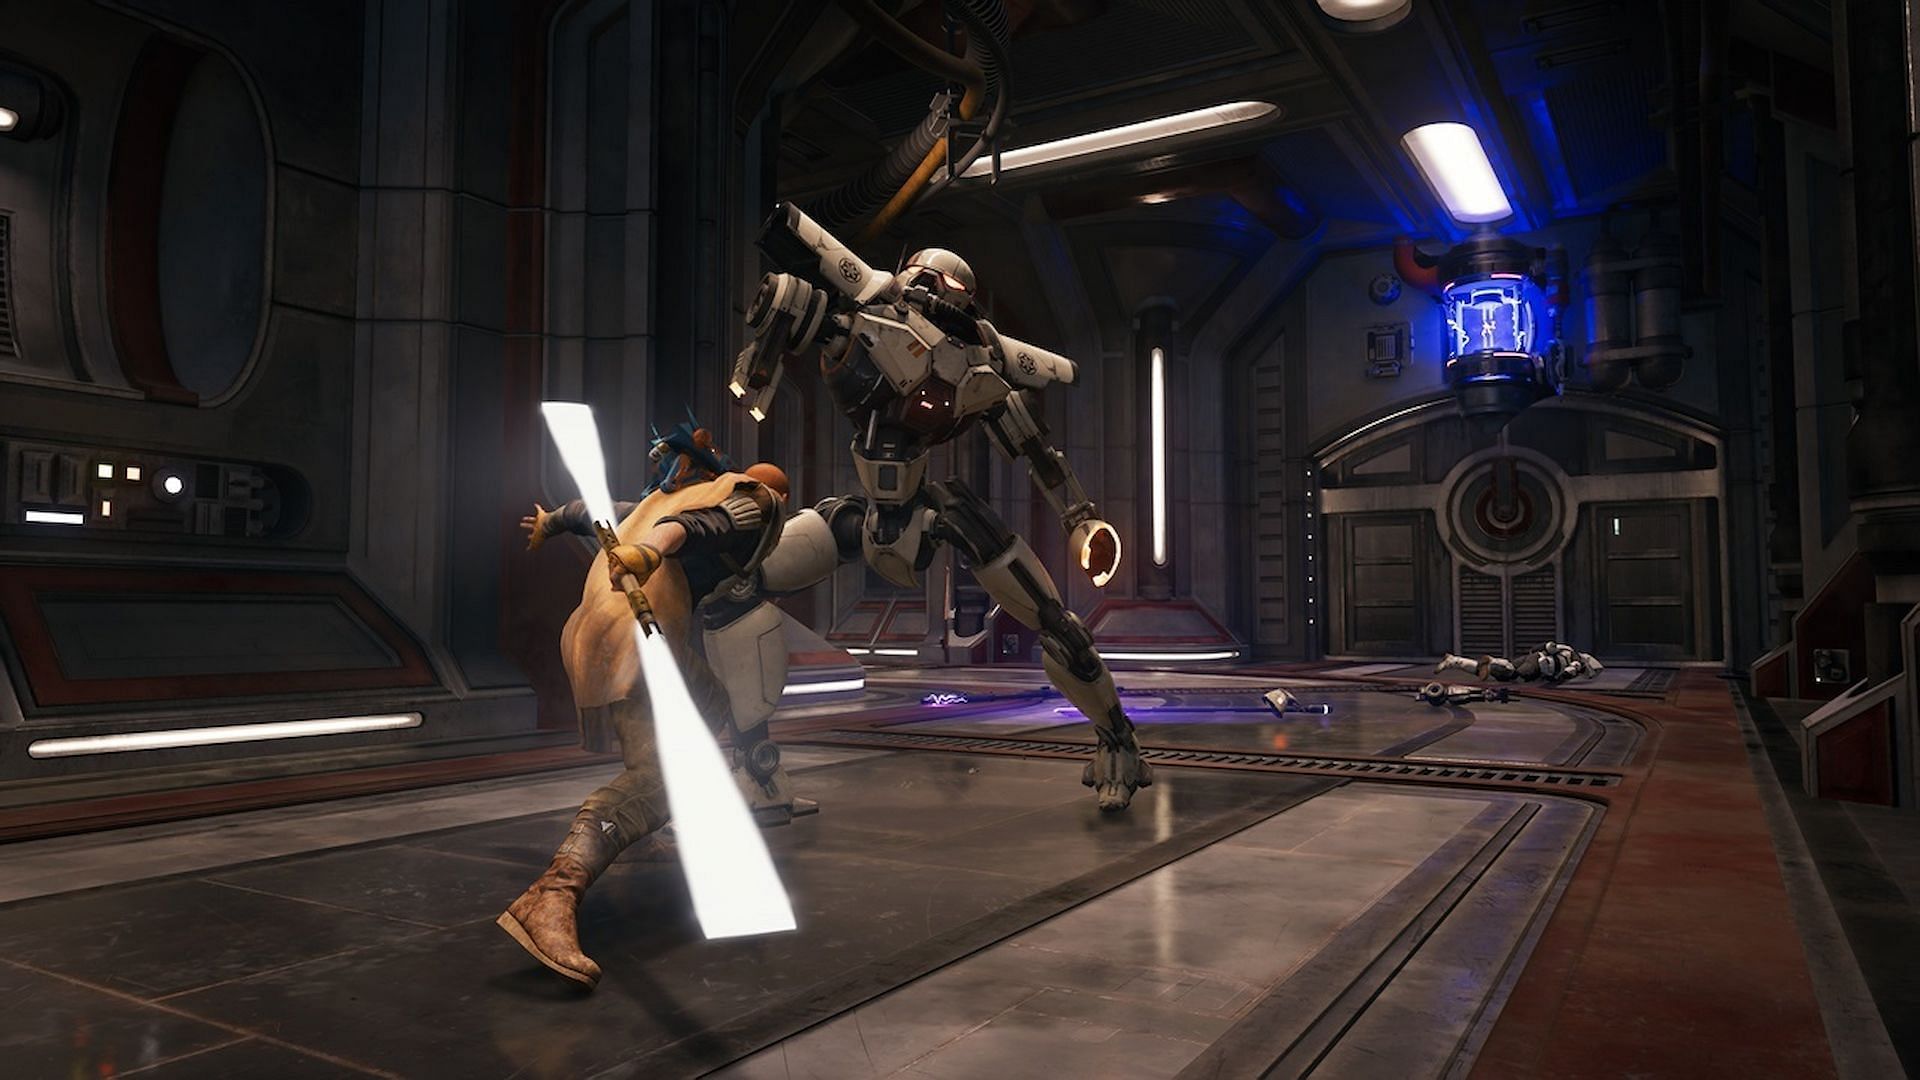 D-L1t can be located in the Hangar 2046-C area on Coruscant in Star Wars Jedi Survivor (Image via Electronic Arts)